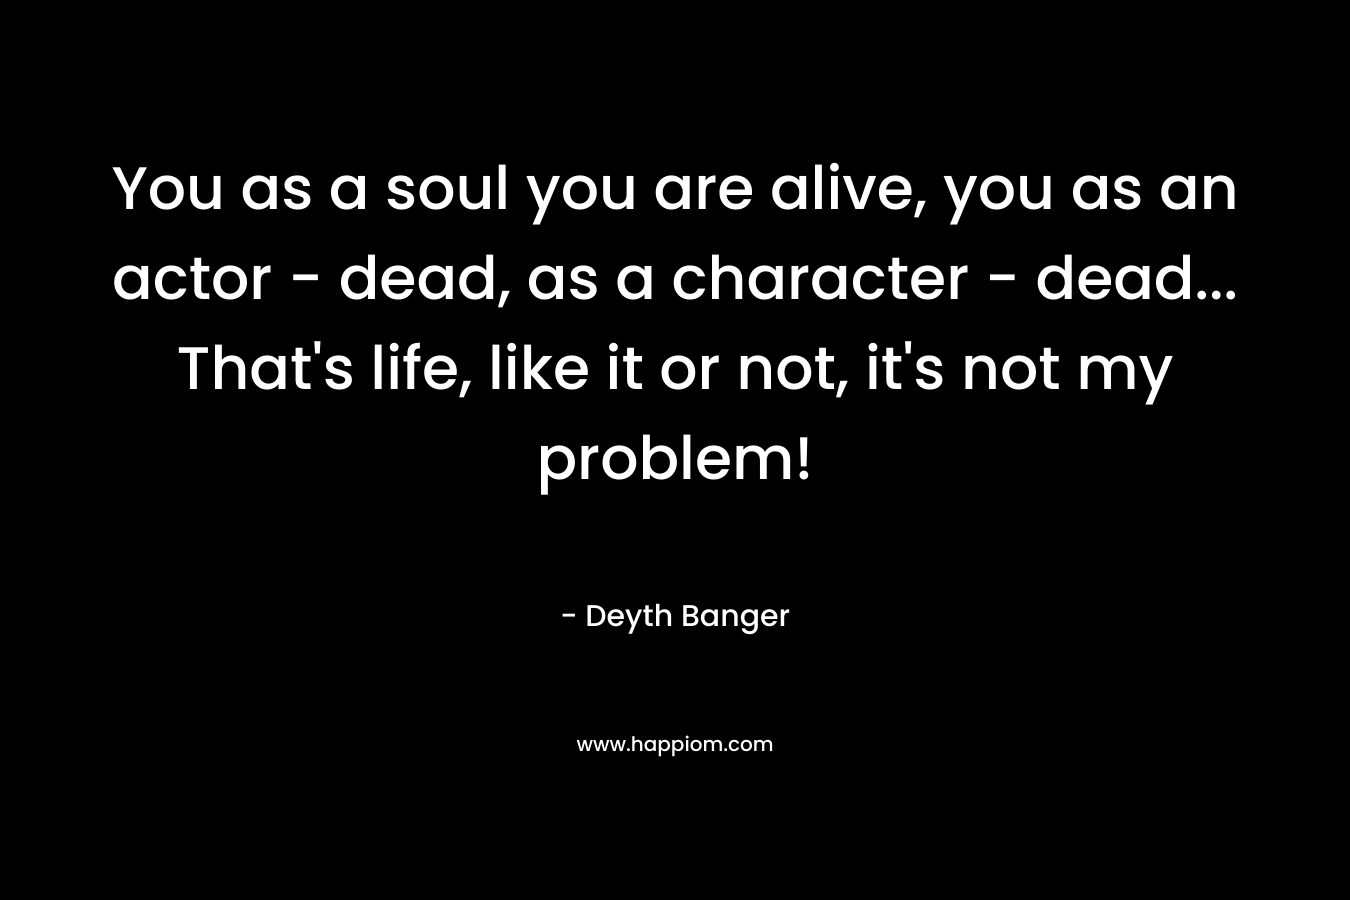 You as a soul you are alive, you as an actor - dead, as a character - dead... That's life, like it or not, it's not my problem!